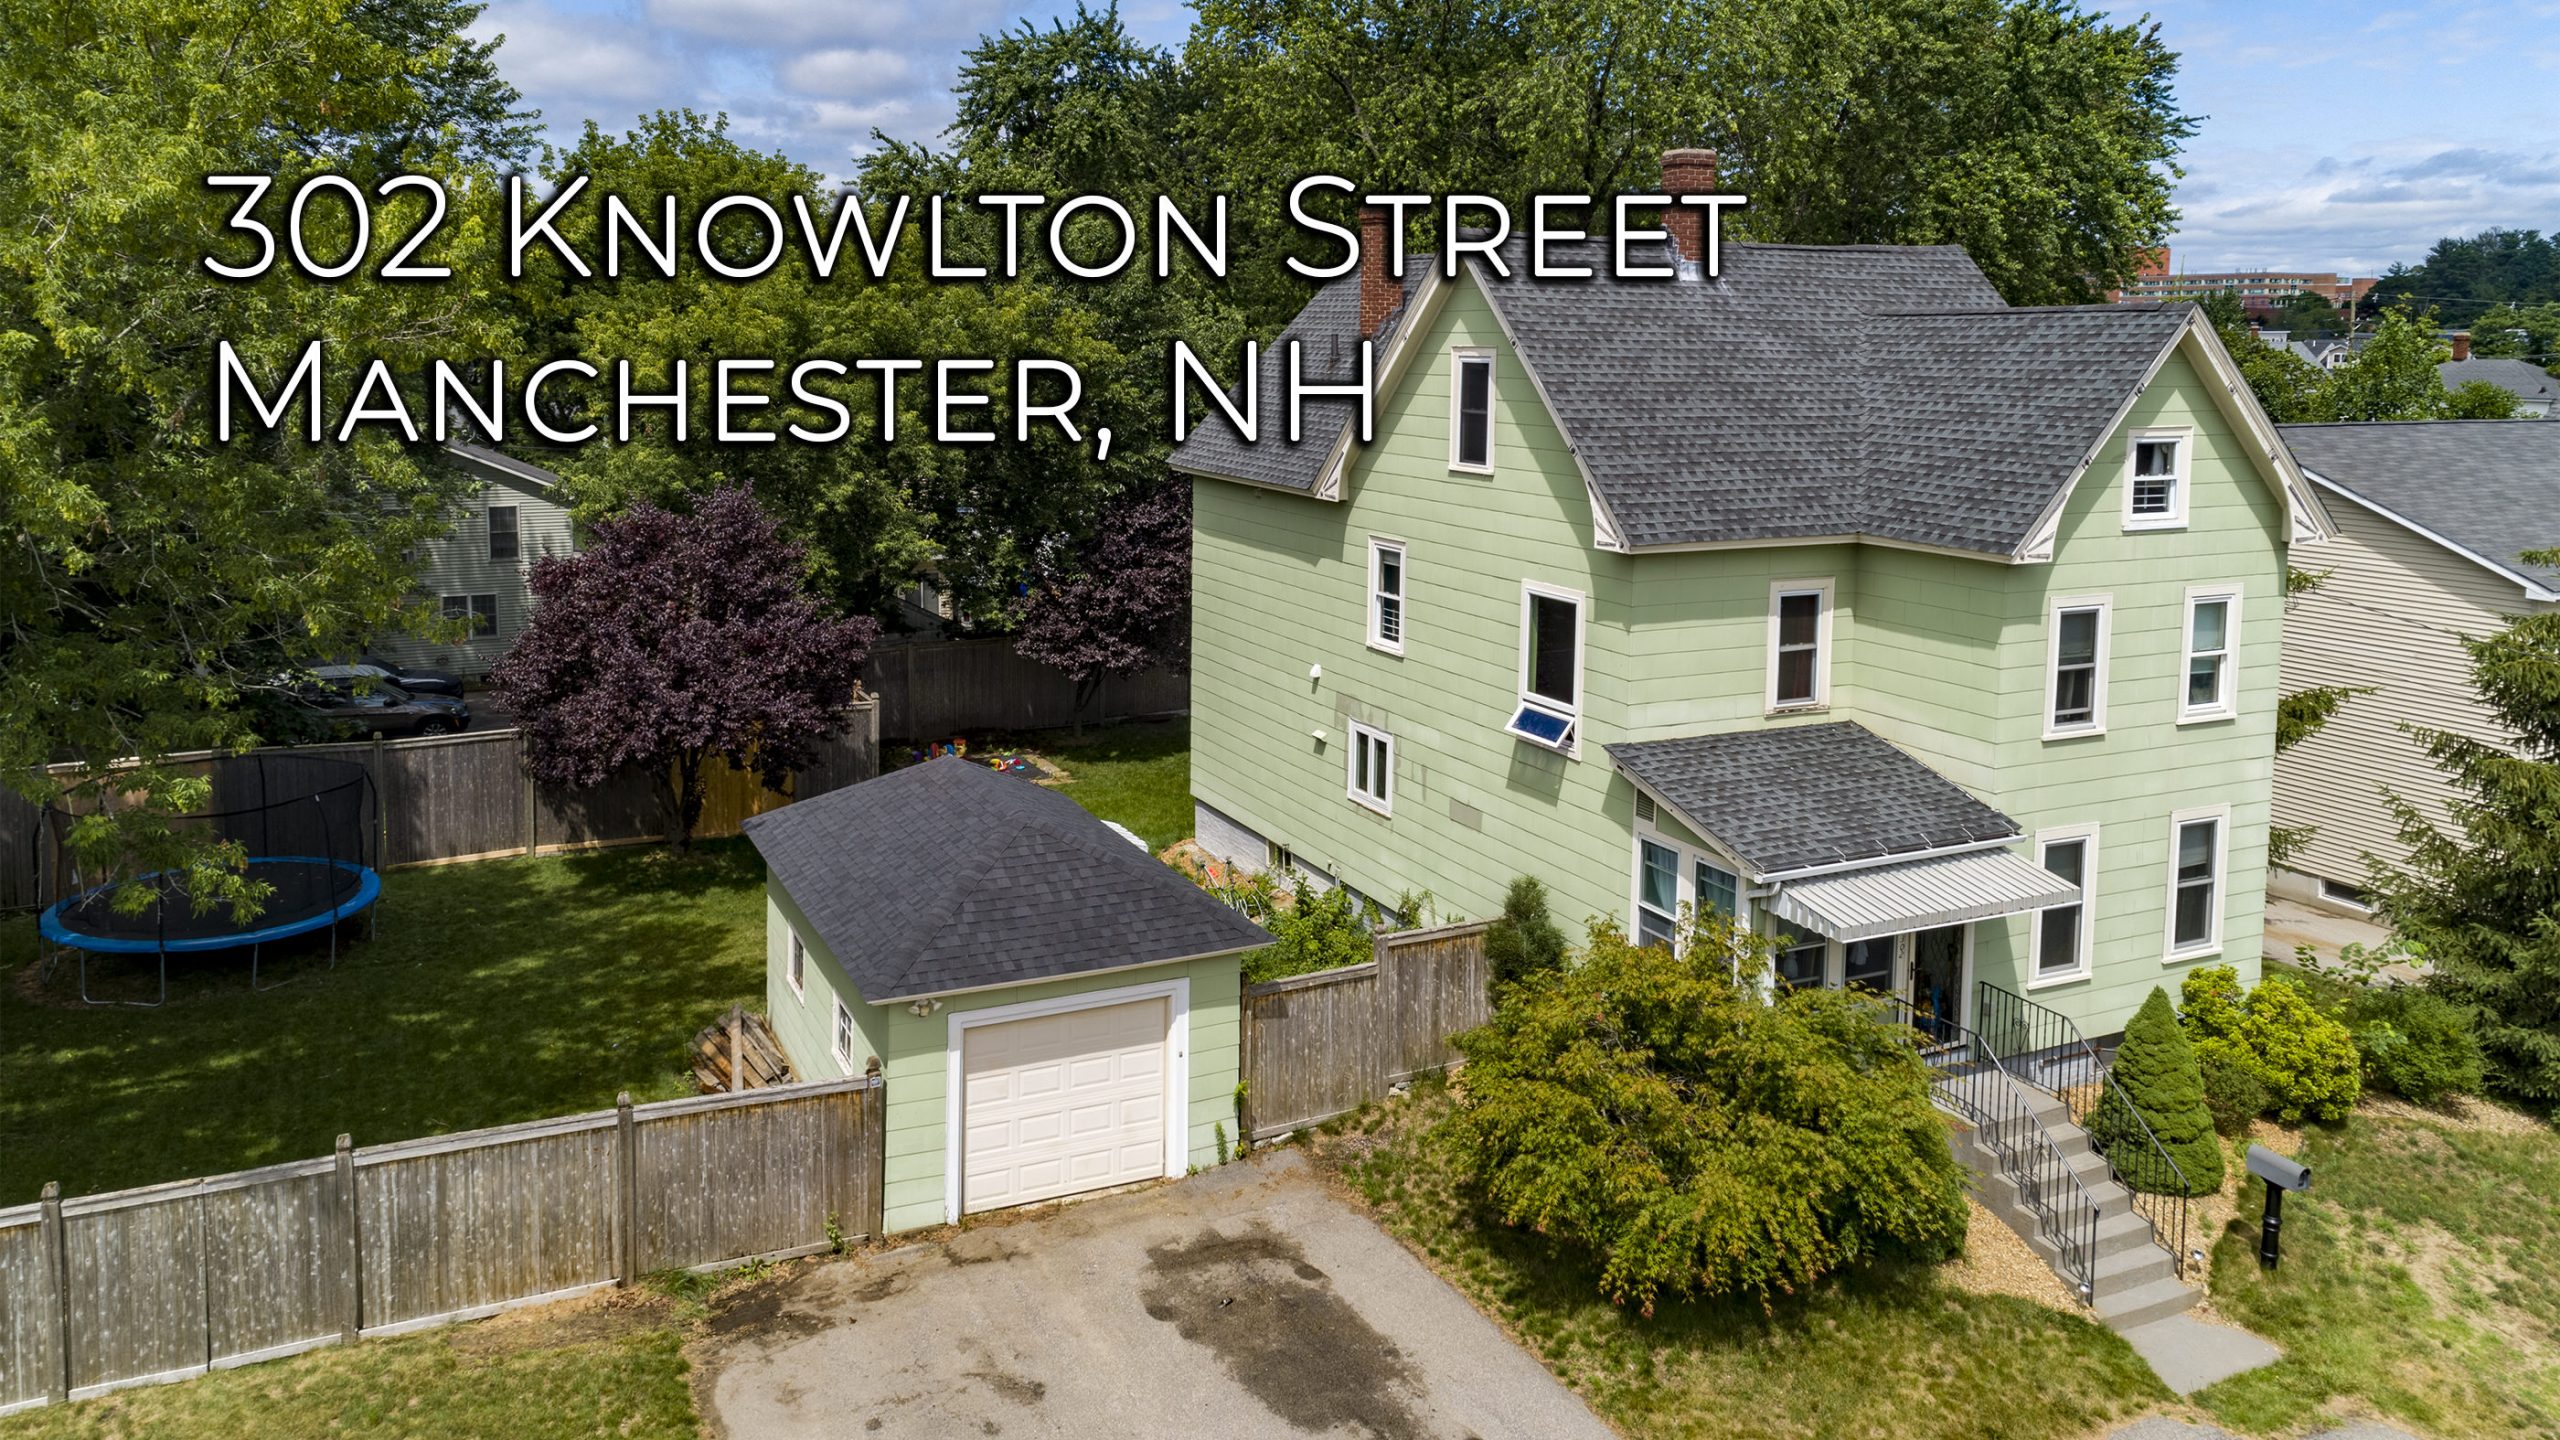 302 Knowlton St Manchester NH 03103